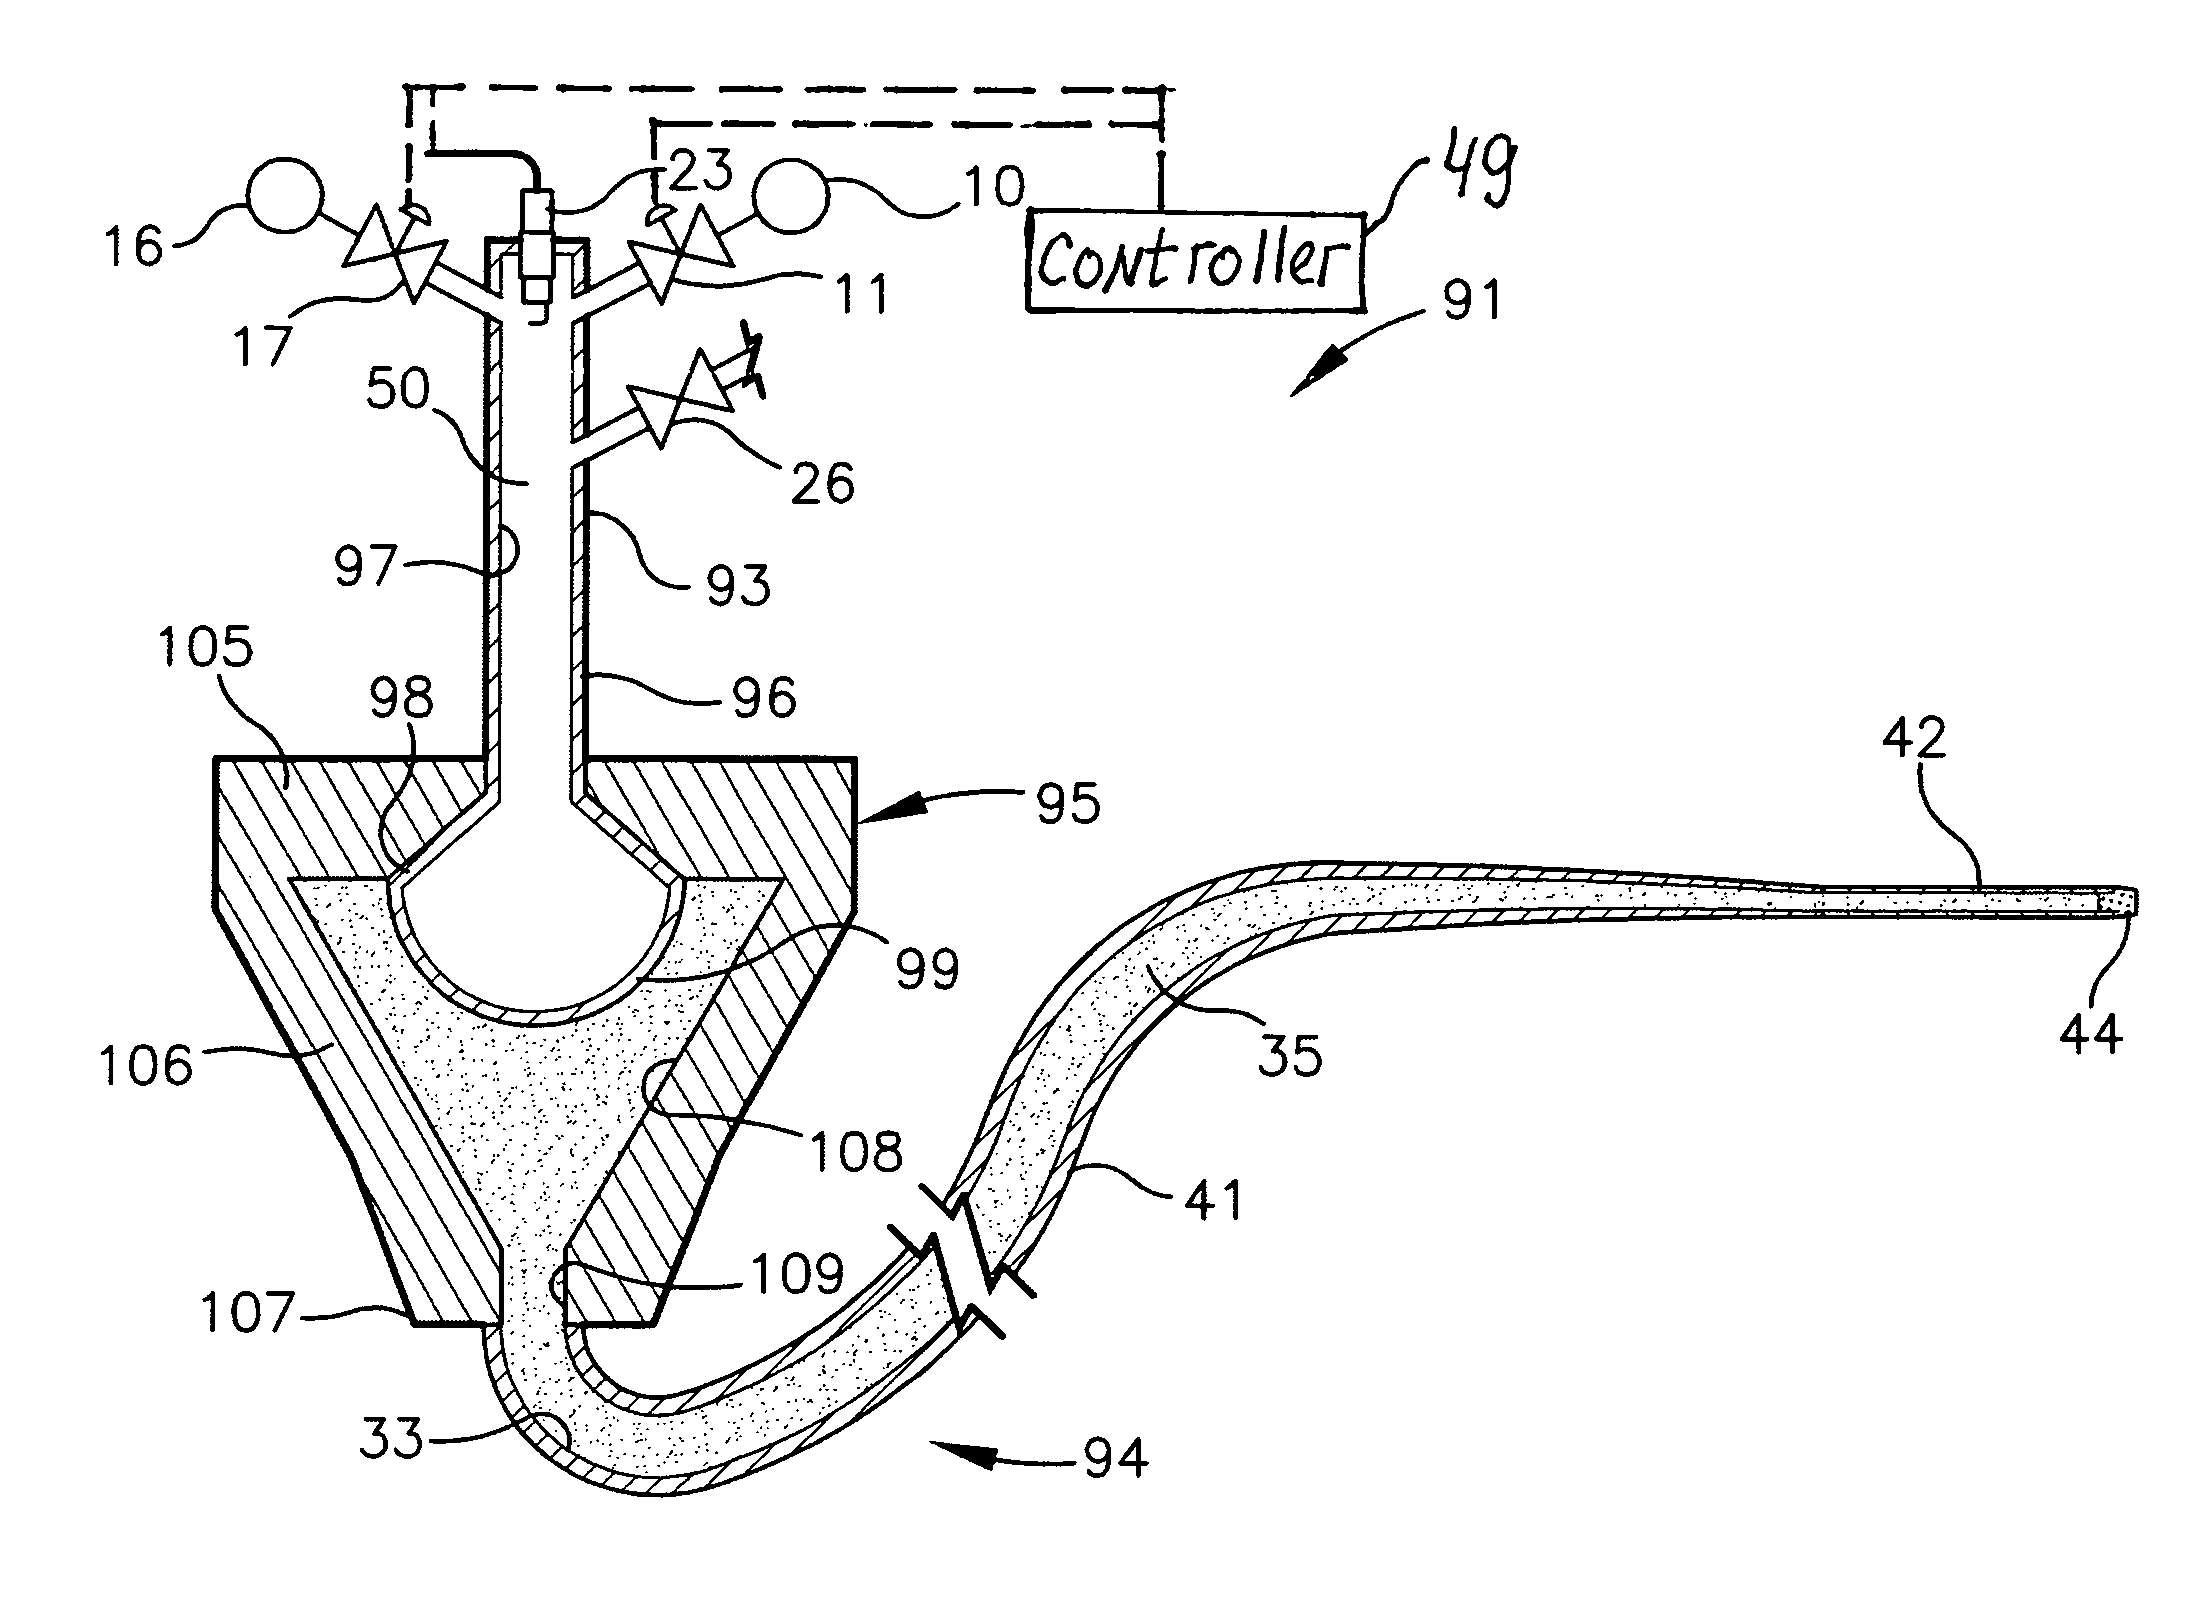 Stereotactic shockwave surgery and drug delivery apparatus